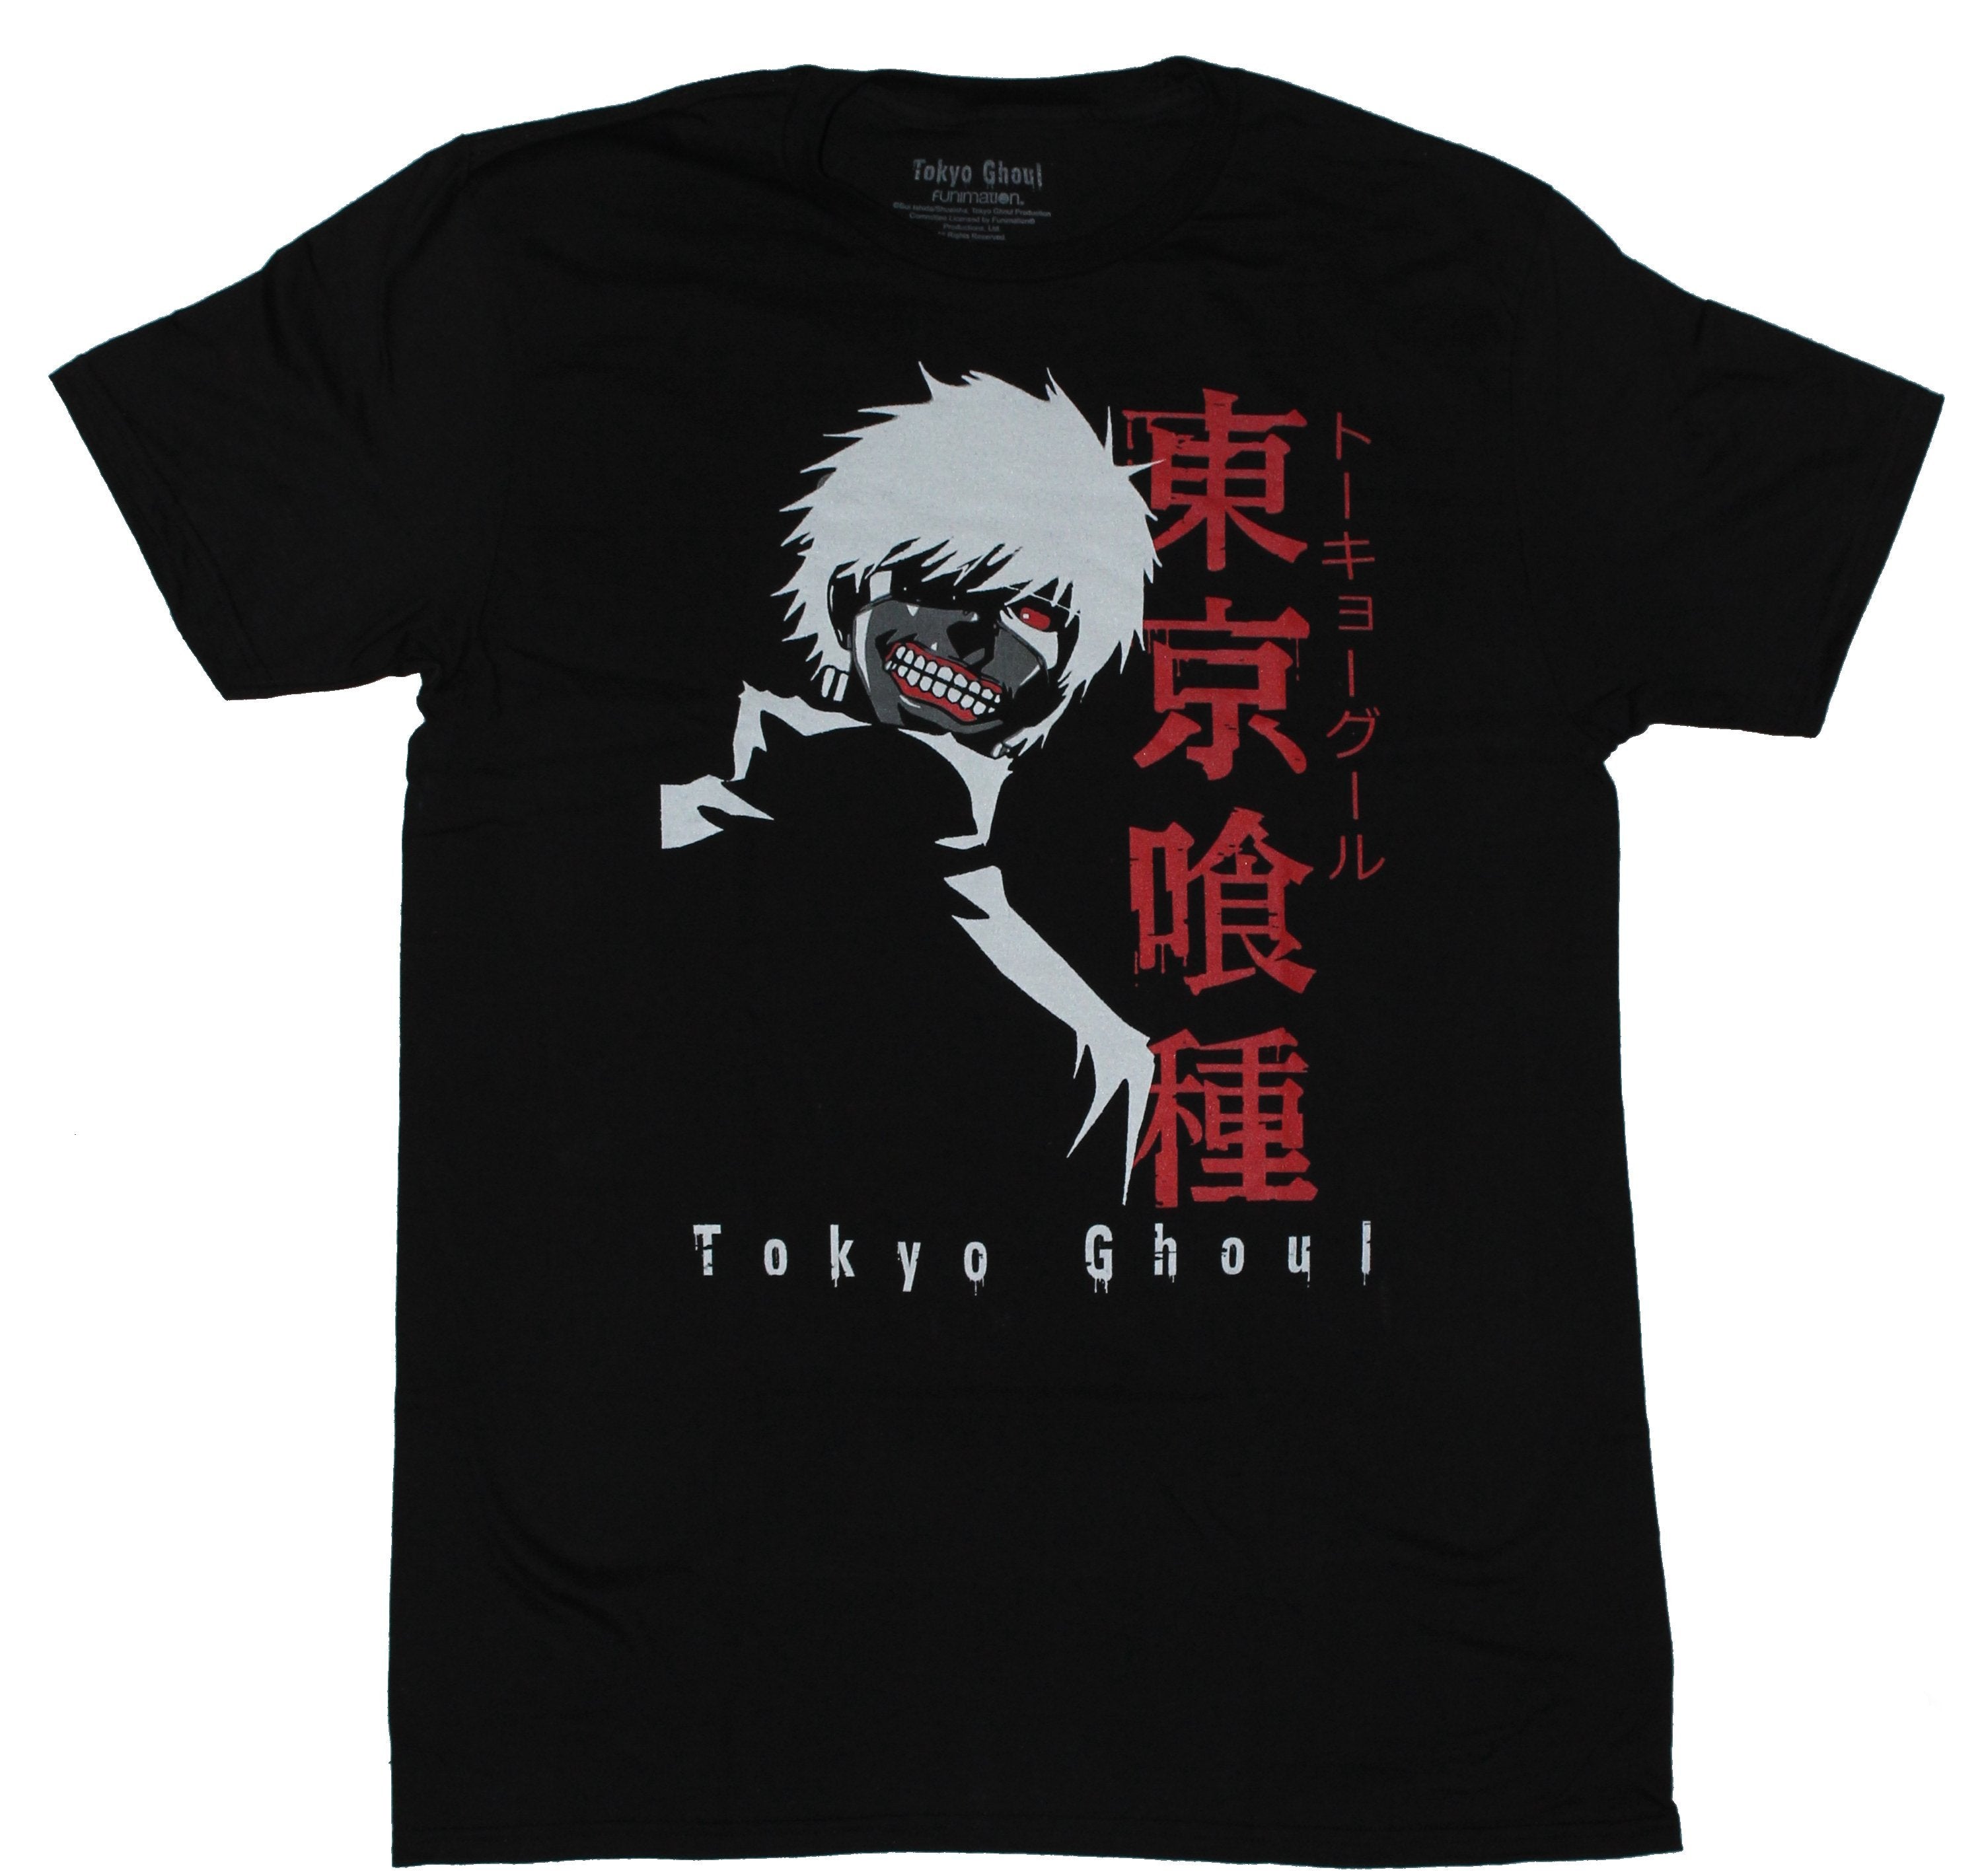 Tokyo Ghoul Mens T-Shirt - Grinning Next To Japanese Characters